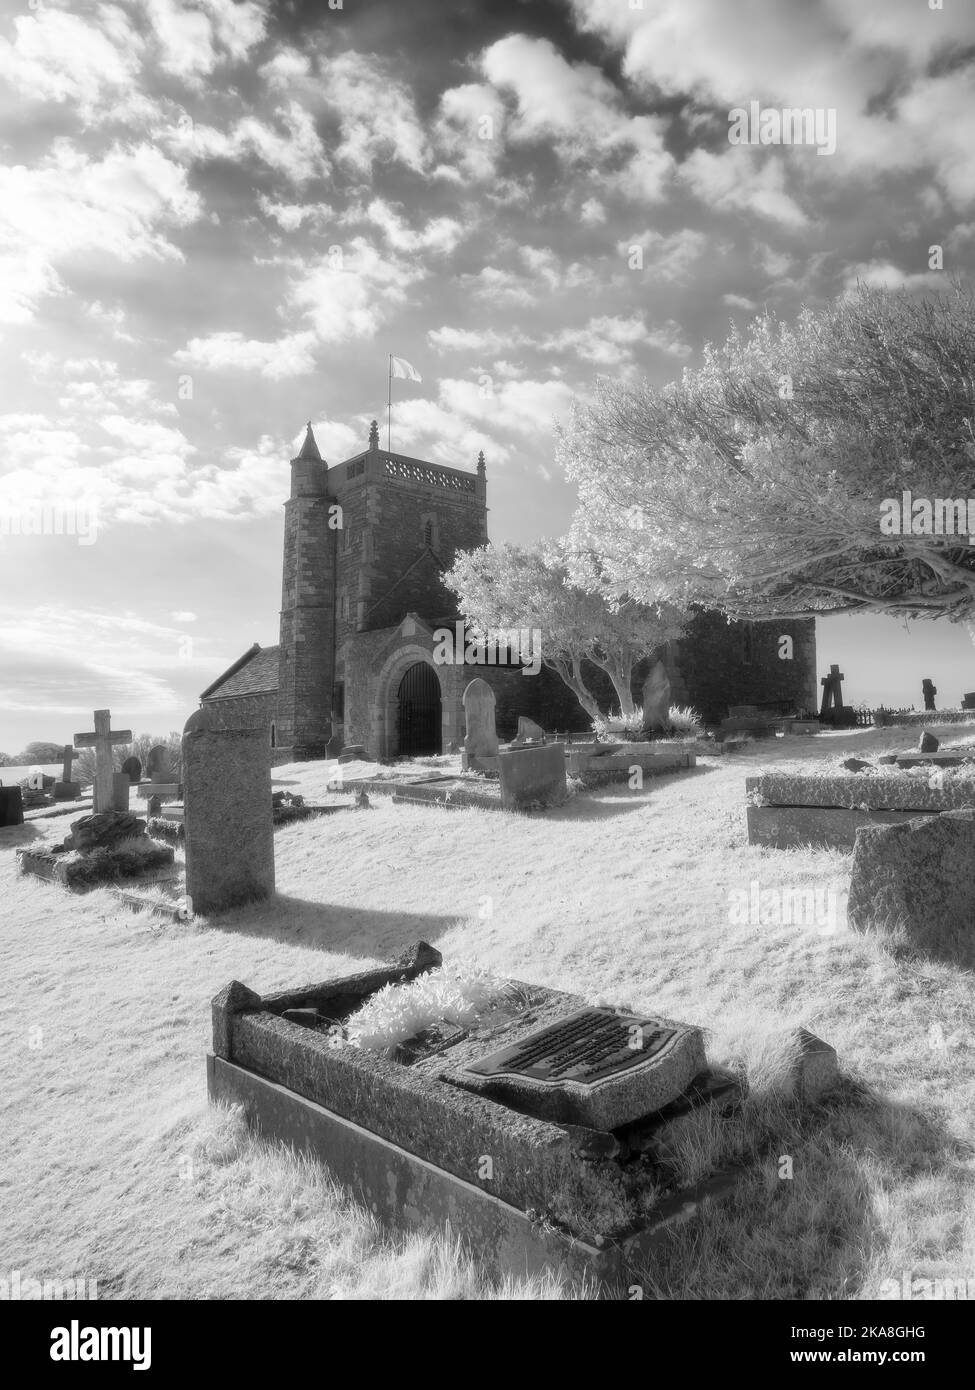 An infrared photograph of the Old Church of St Nicholas at Uphill, Weston-super-Mare, North Somerset, England. Stock Photo